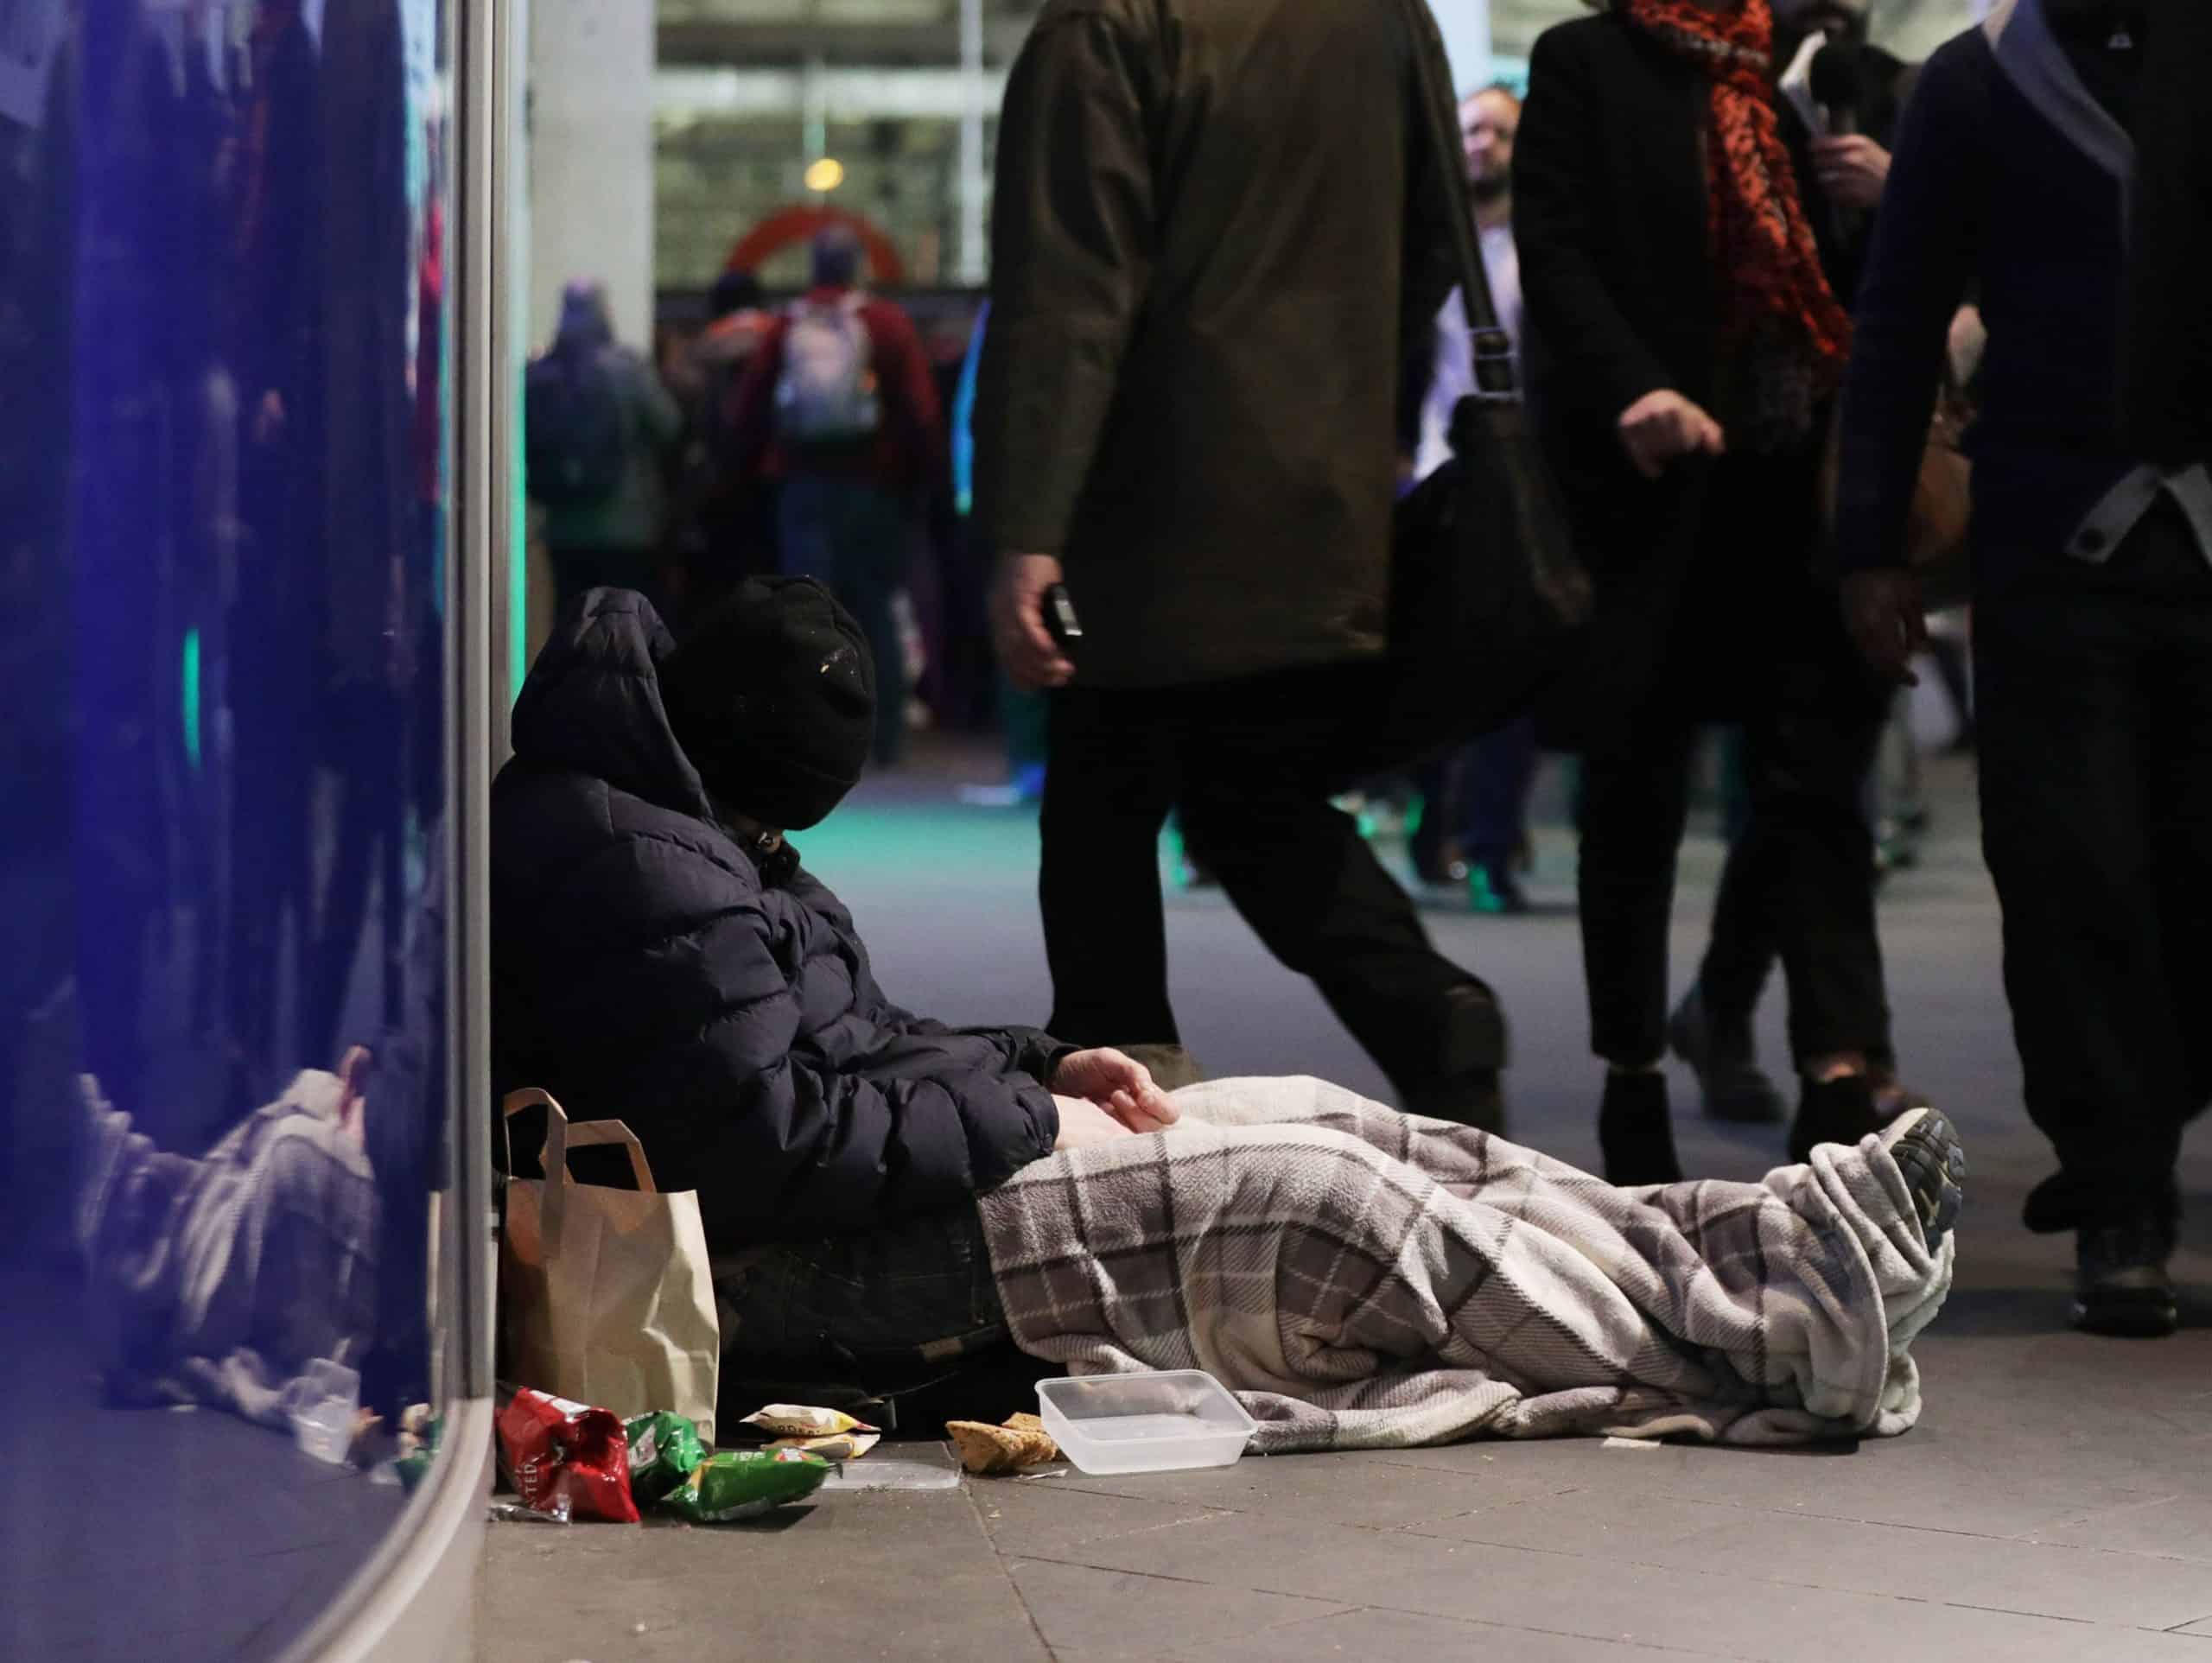 Demands for ‘cruel, Dickensian’ Vagrancy Act to be scrapped – 6 months after Govt said it would be